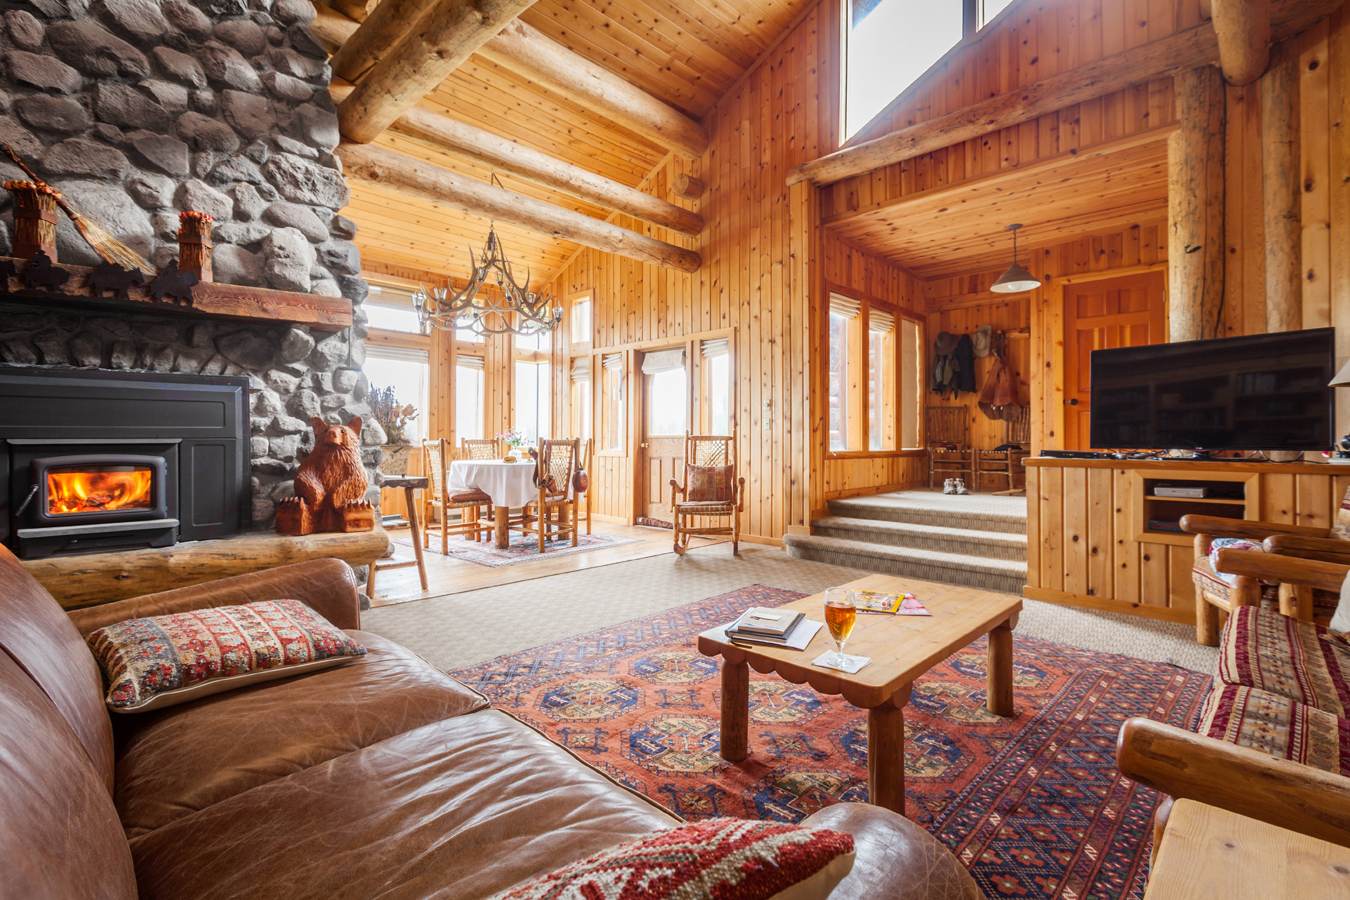 The cabin suite at Brooks Lake Lodge near Dubois, Wyoming, includes a comfy sitting area, fireplace, sofa-bed and private bedroom with king-sized lodgepole pine bed.